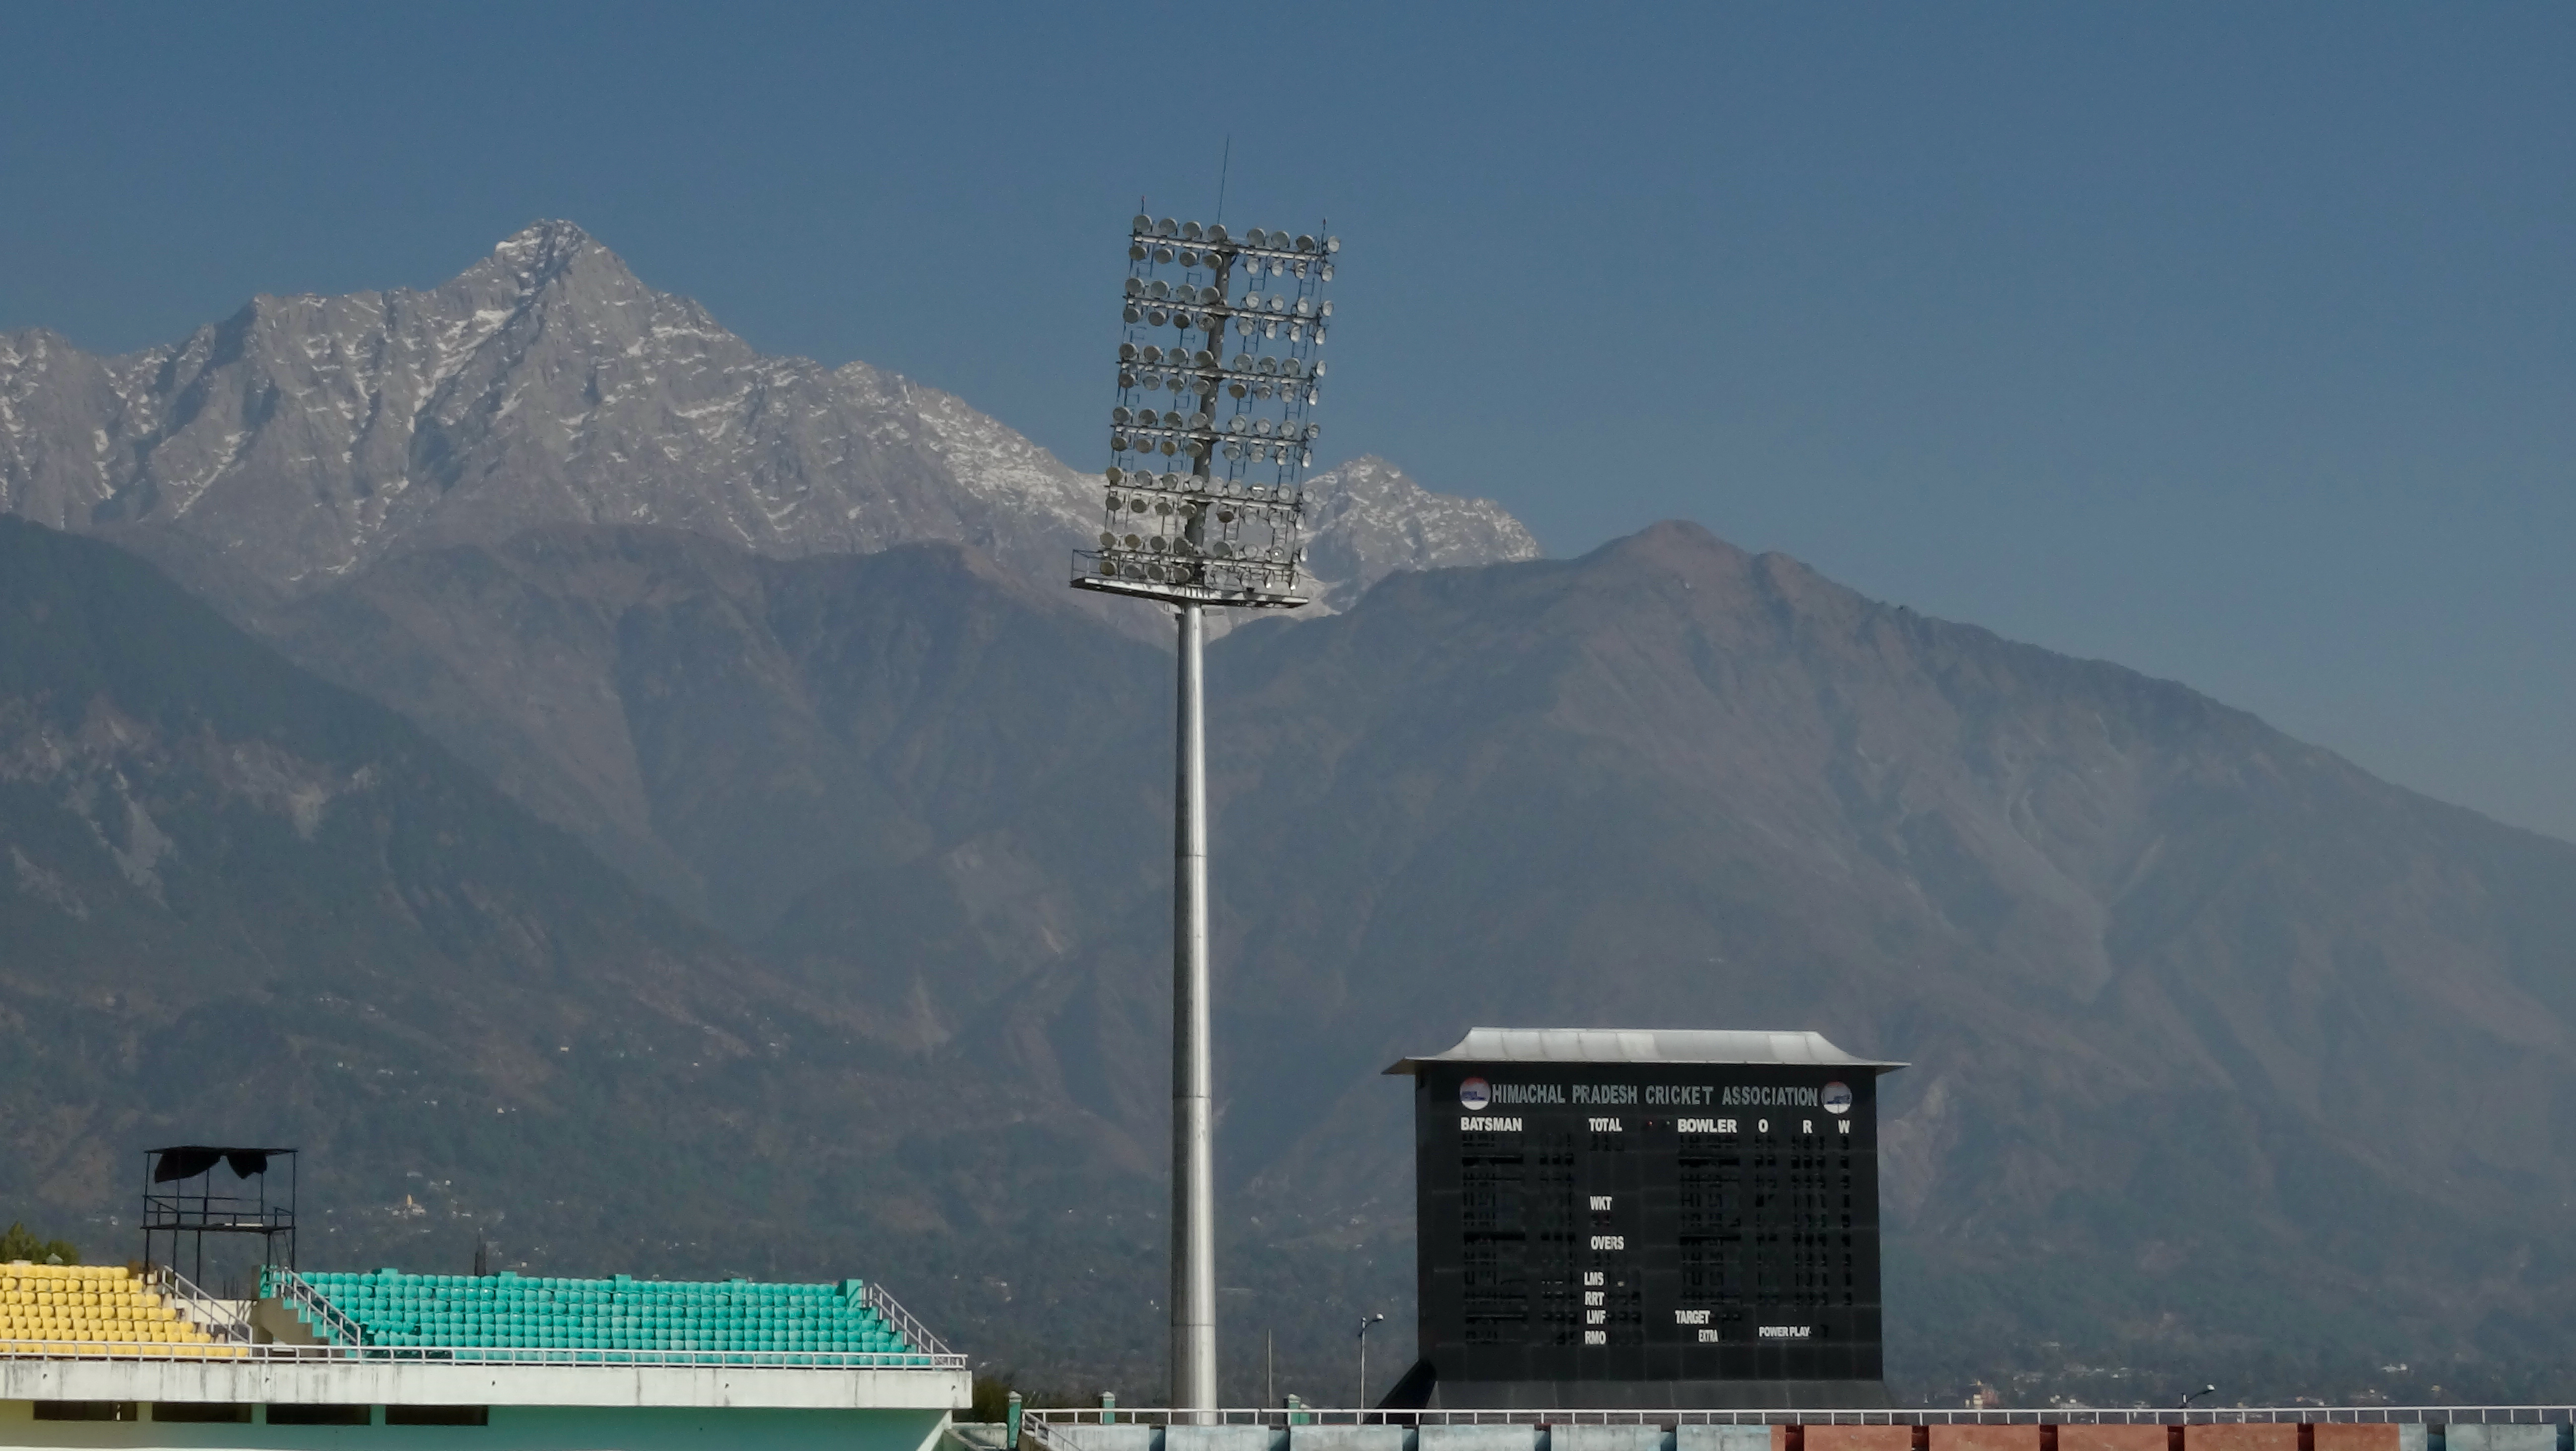 The highest cricket ground in the world